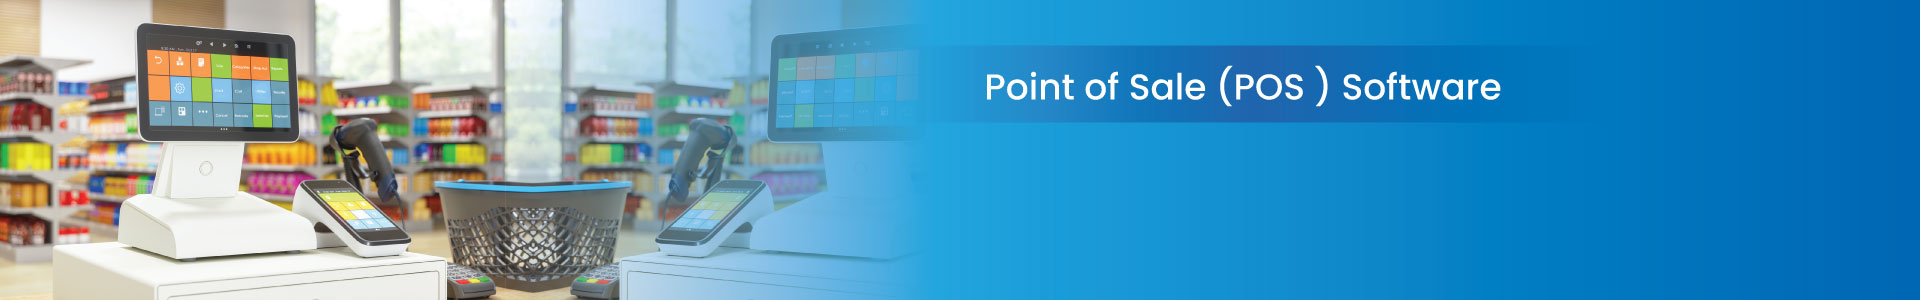 Point of Sale POS Software